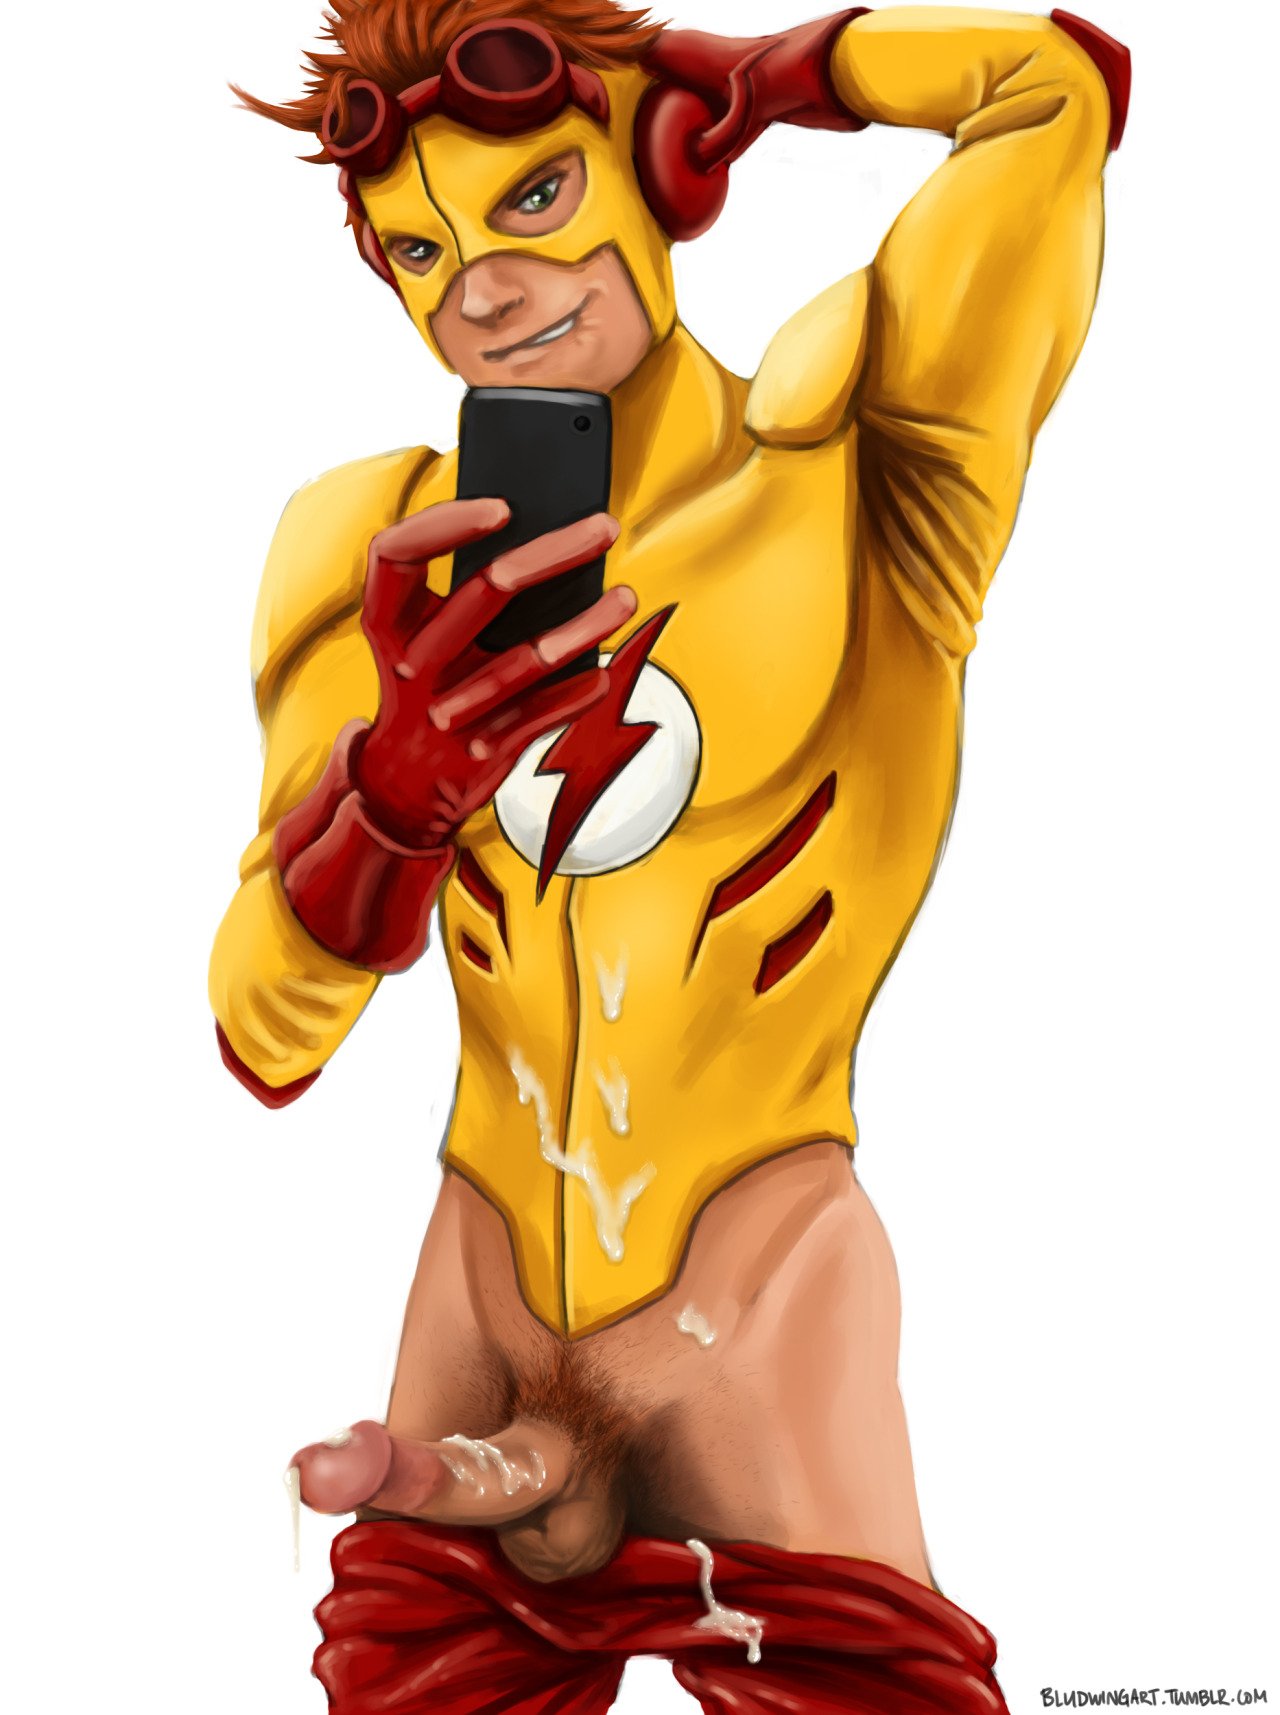 Wally West On Twitter The Hottest Speedster Alive Lewd Smut Literate Semi Descriptive